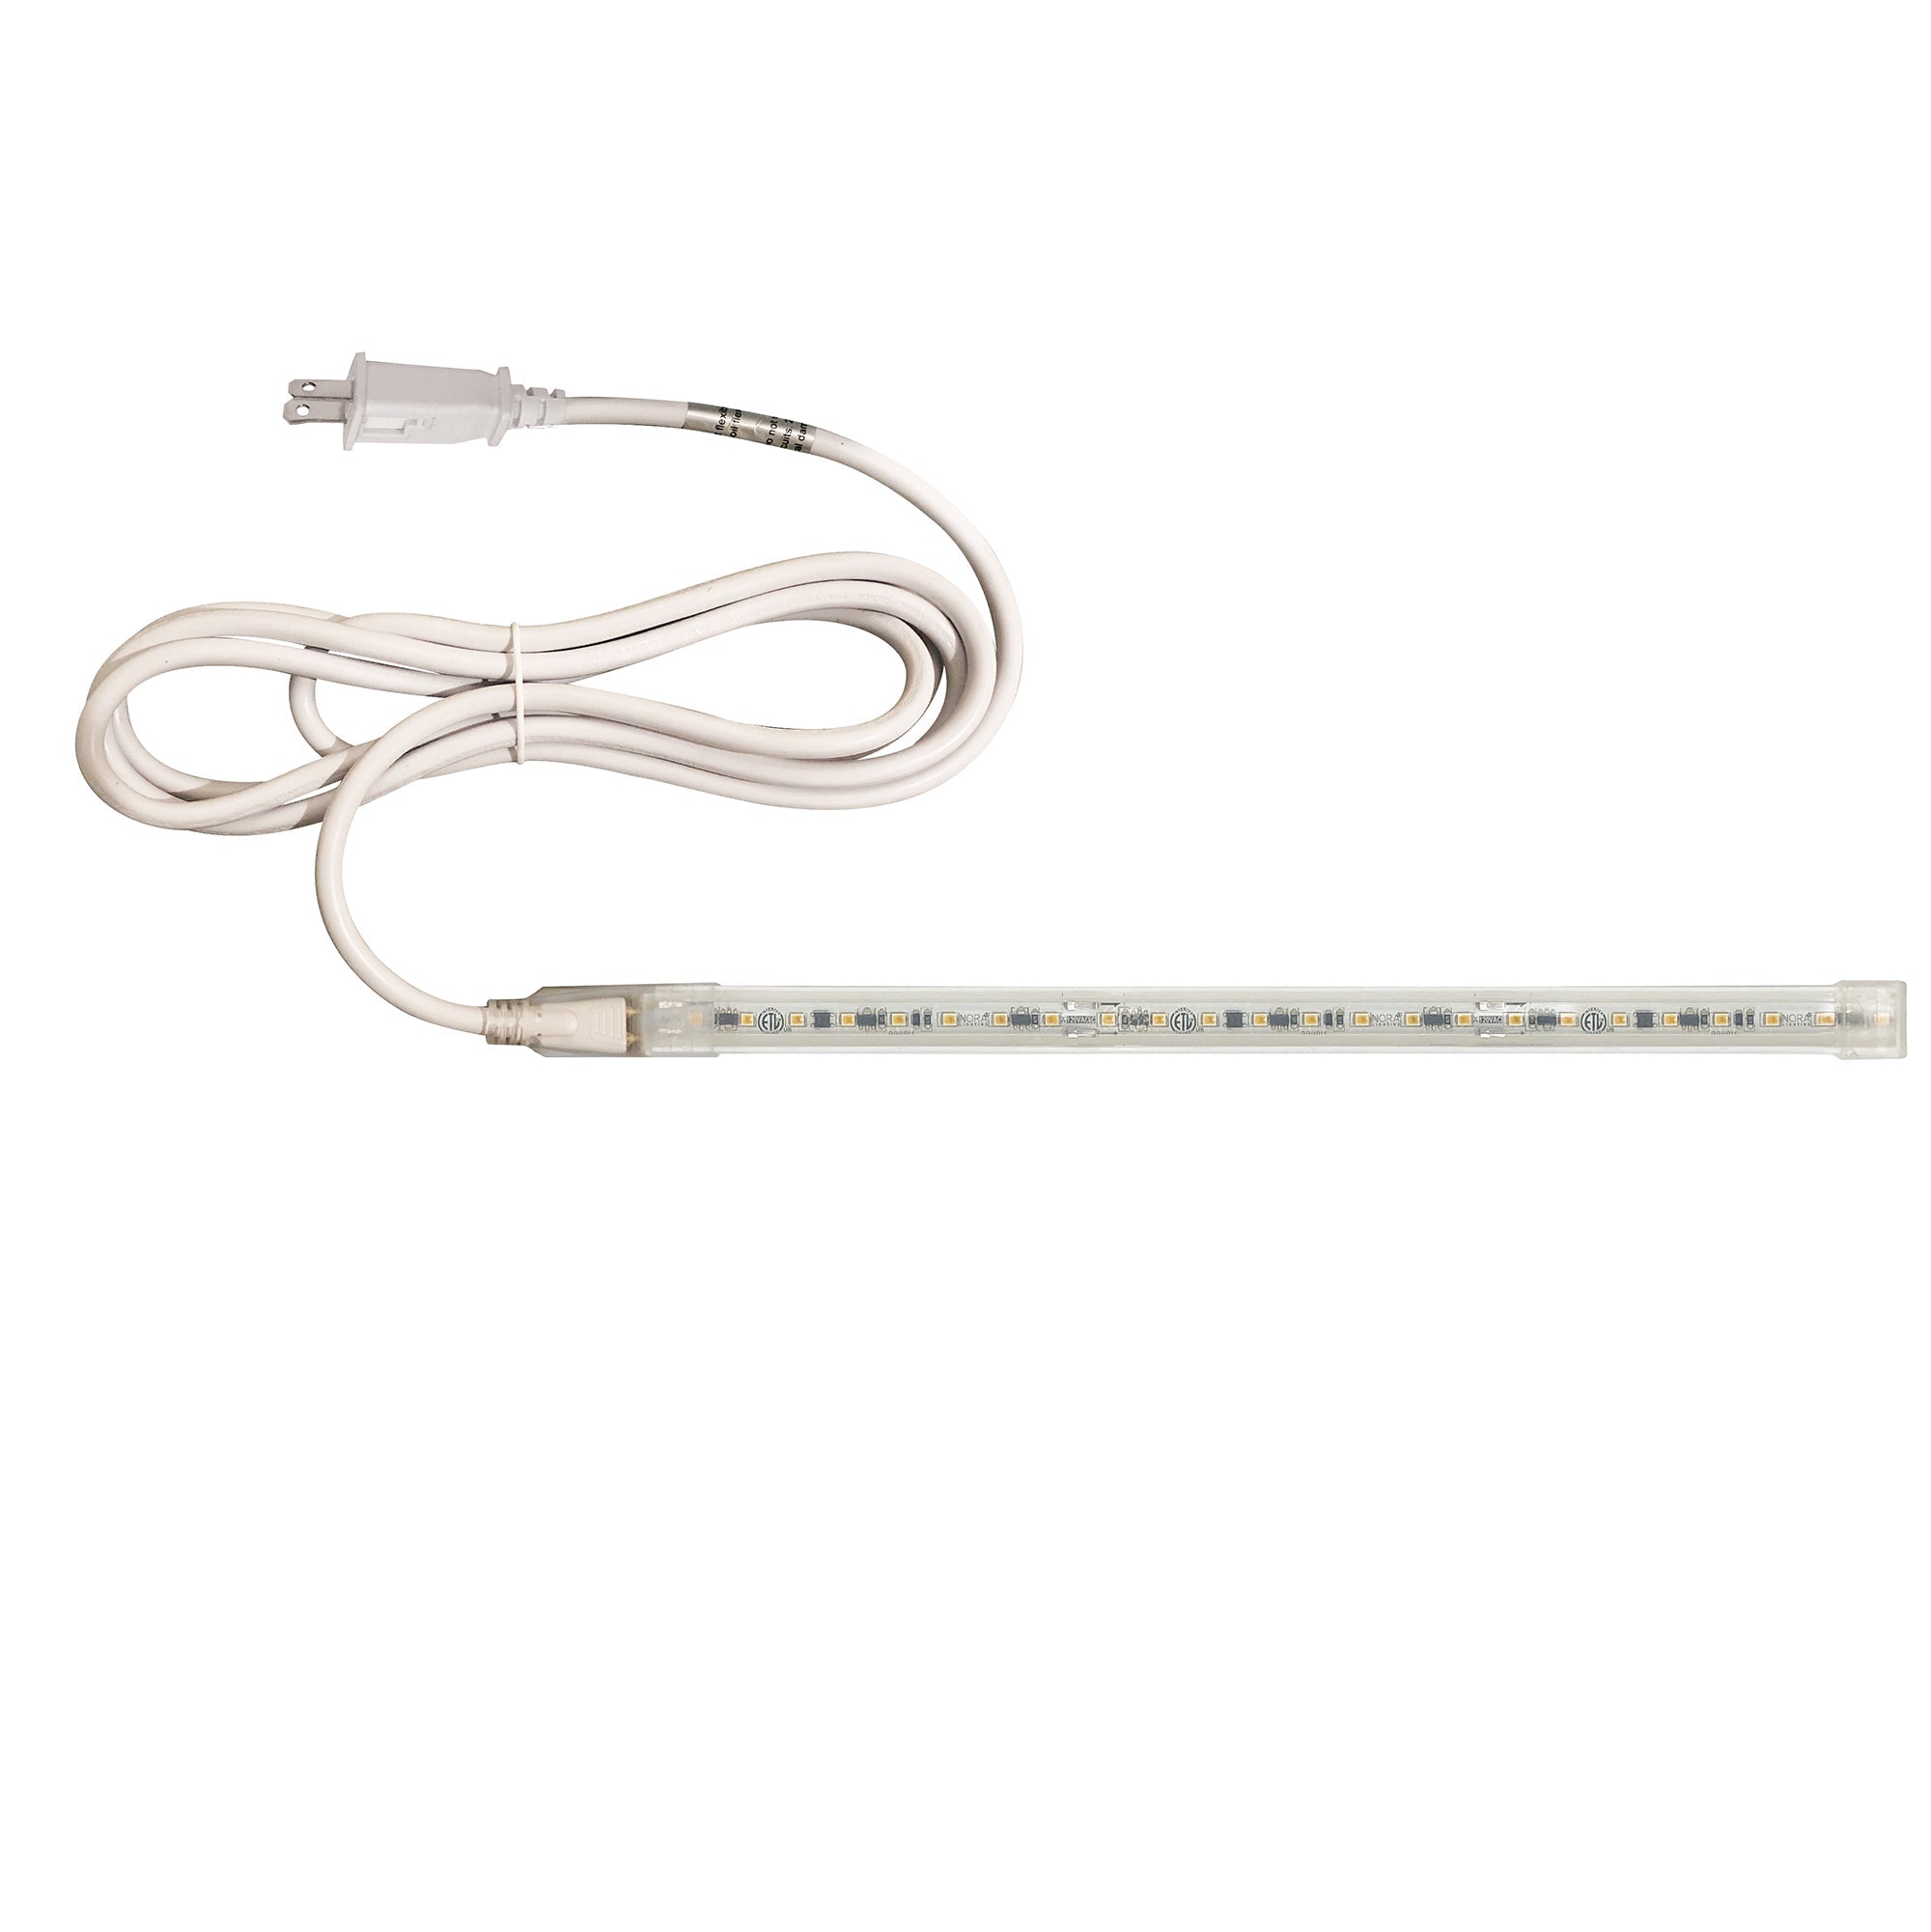 Nora Lighting NUTP13-W62-12-930/CP - Accent / Undercabinet - Custom Cut 62-ft 120V Continuous LED Tape Light, 330lm / 3.6W per foot, 3000K, w/ Mounting Clips and 8' Cord & Plug